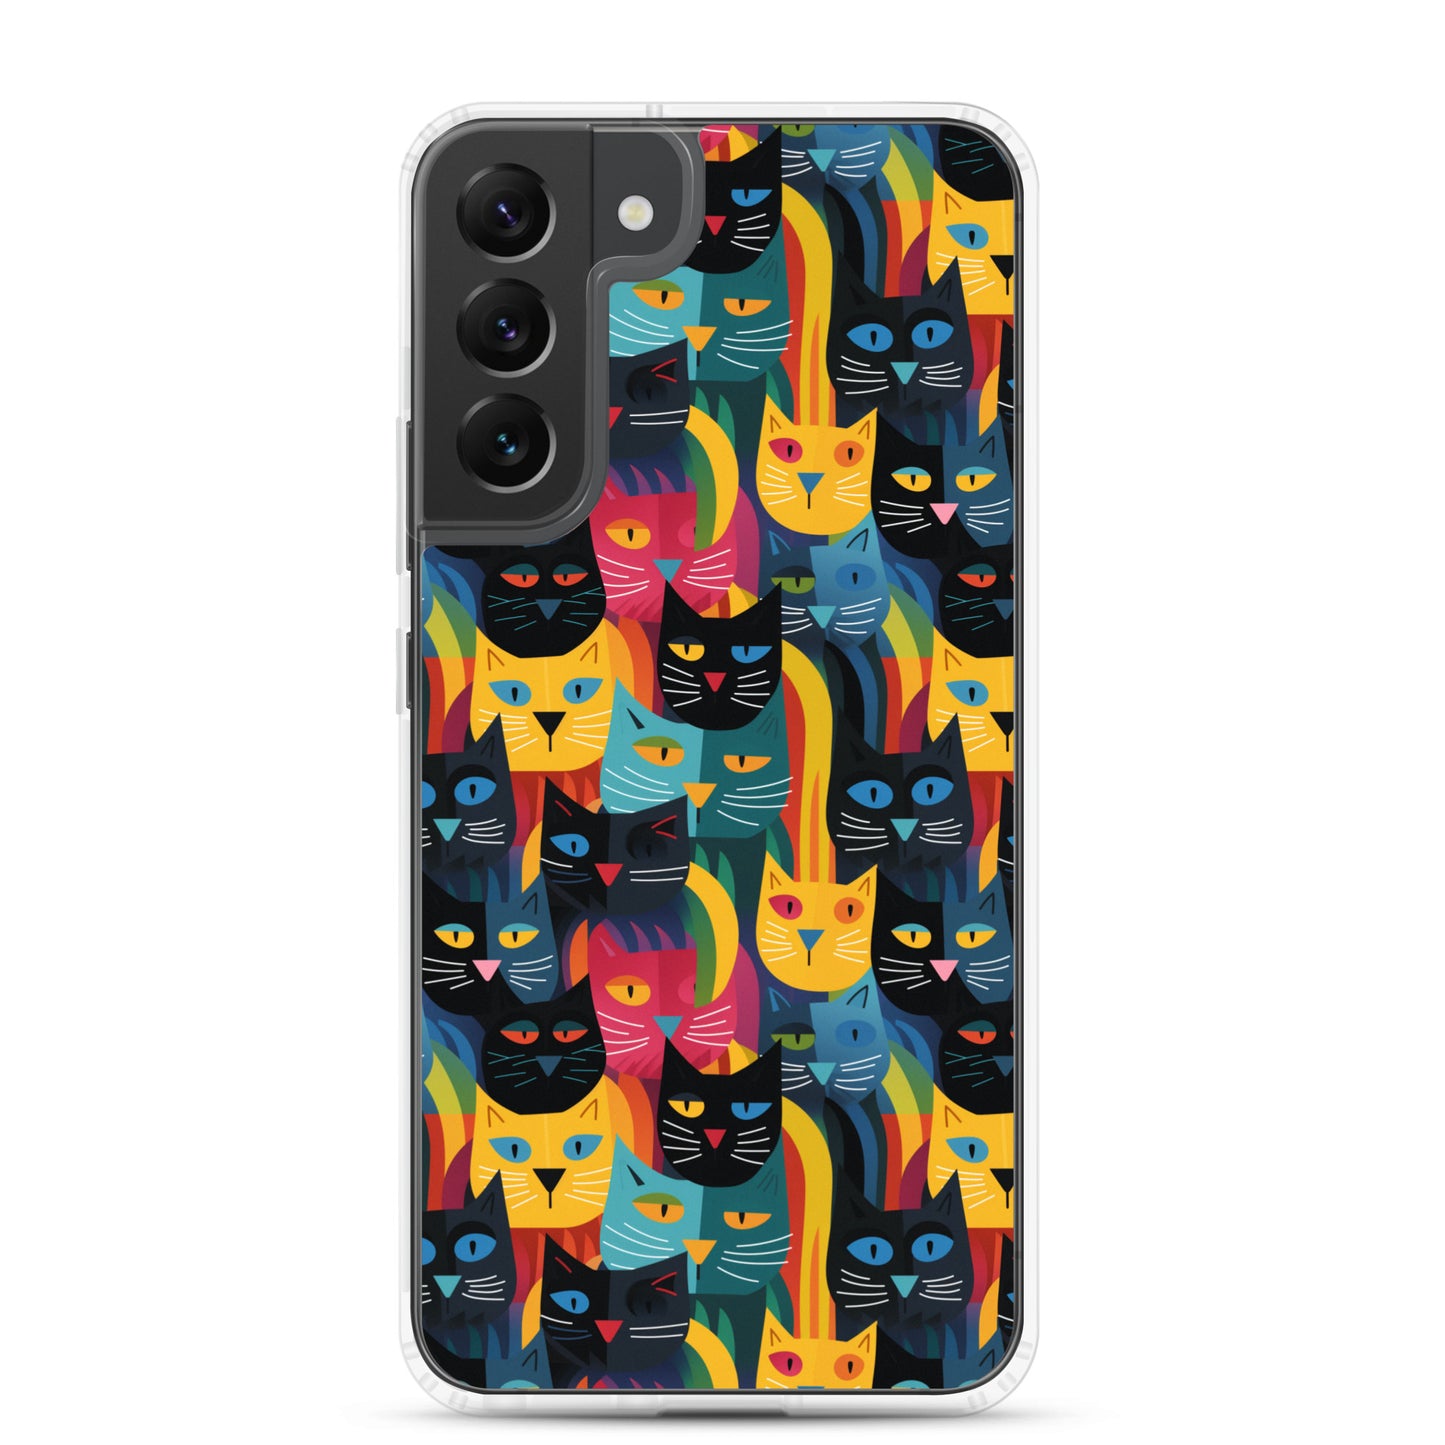 Samsung Case - Colorful Cats Pattern